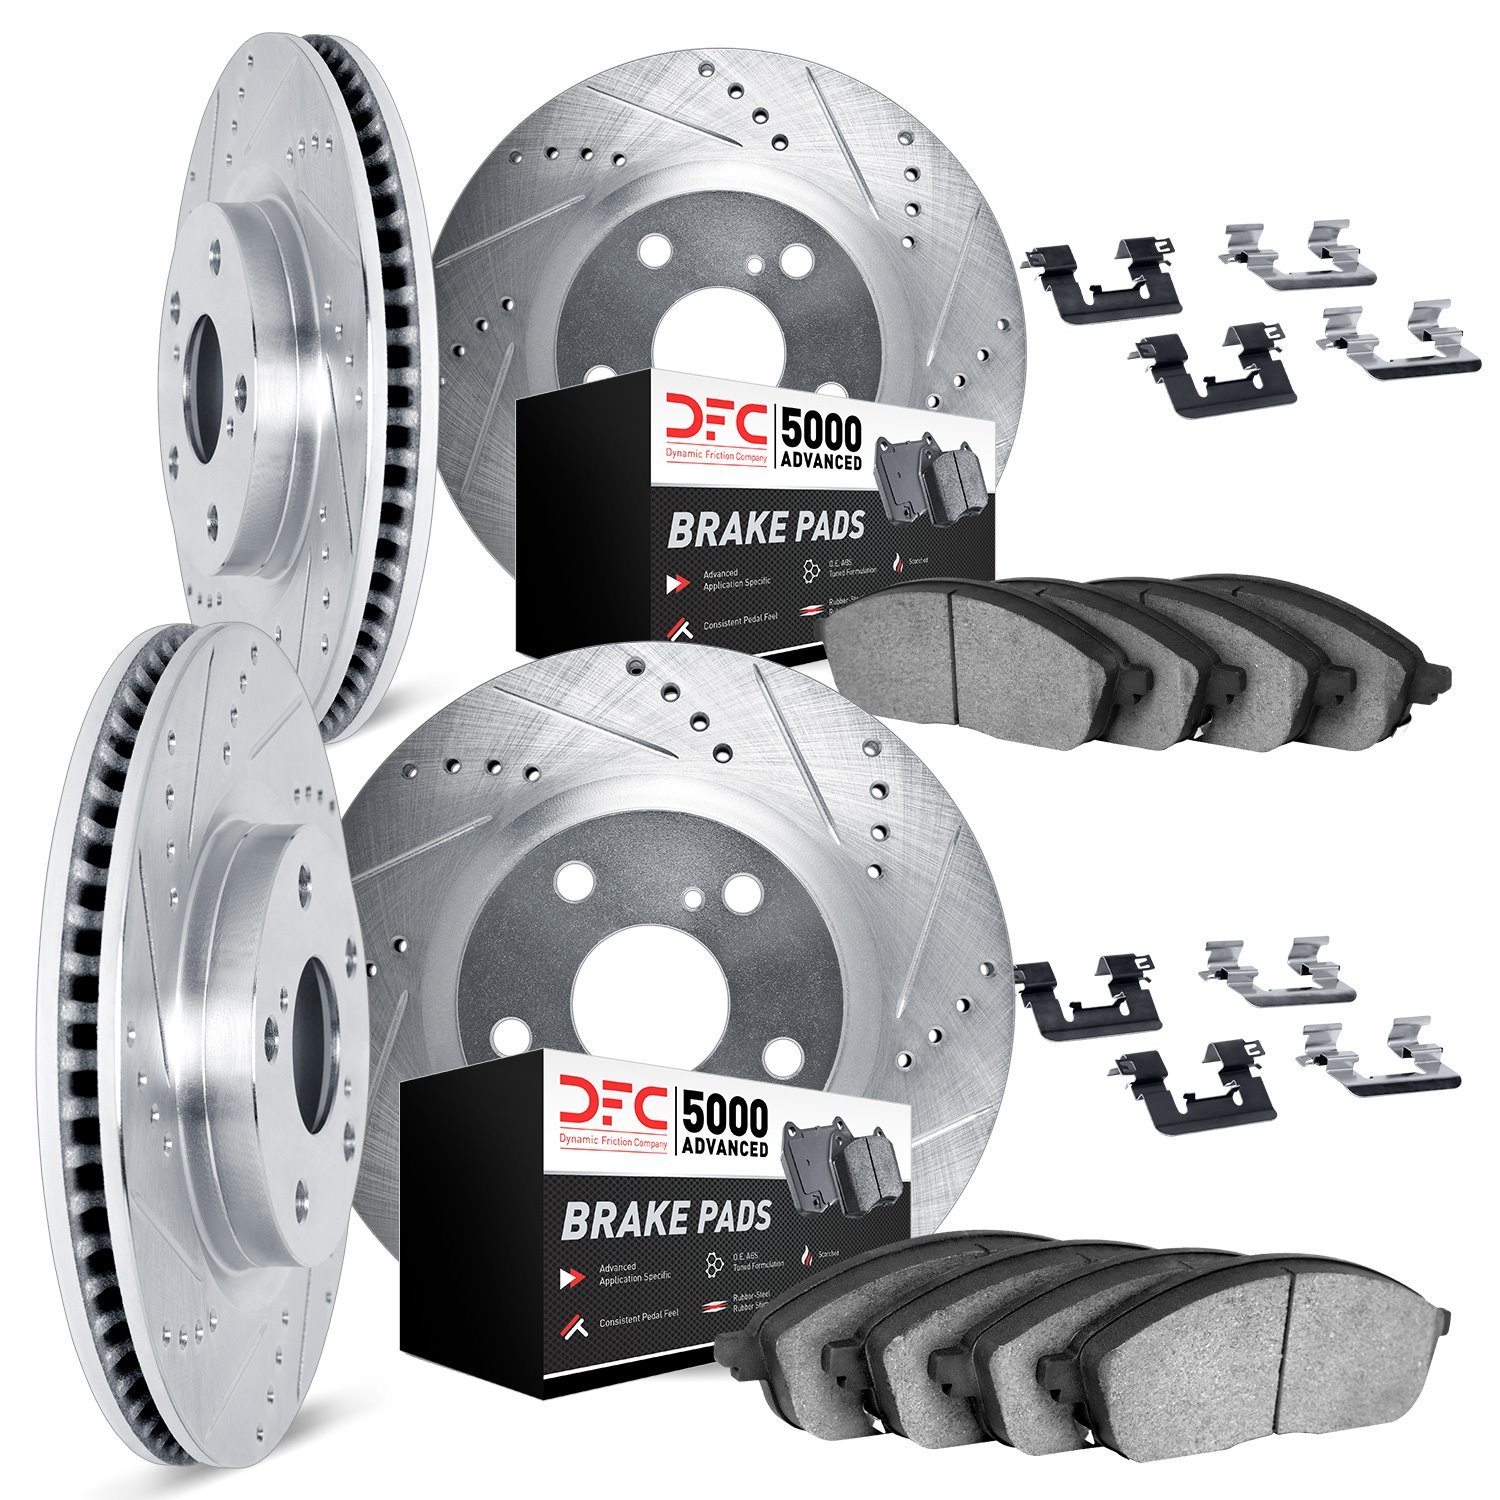 7514-13025 Drilled/Slotted Brake Rotors w/5000 Advanced Brake Pads Kit & Hardware [Silver], Fits Select Subaru, Position: Front